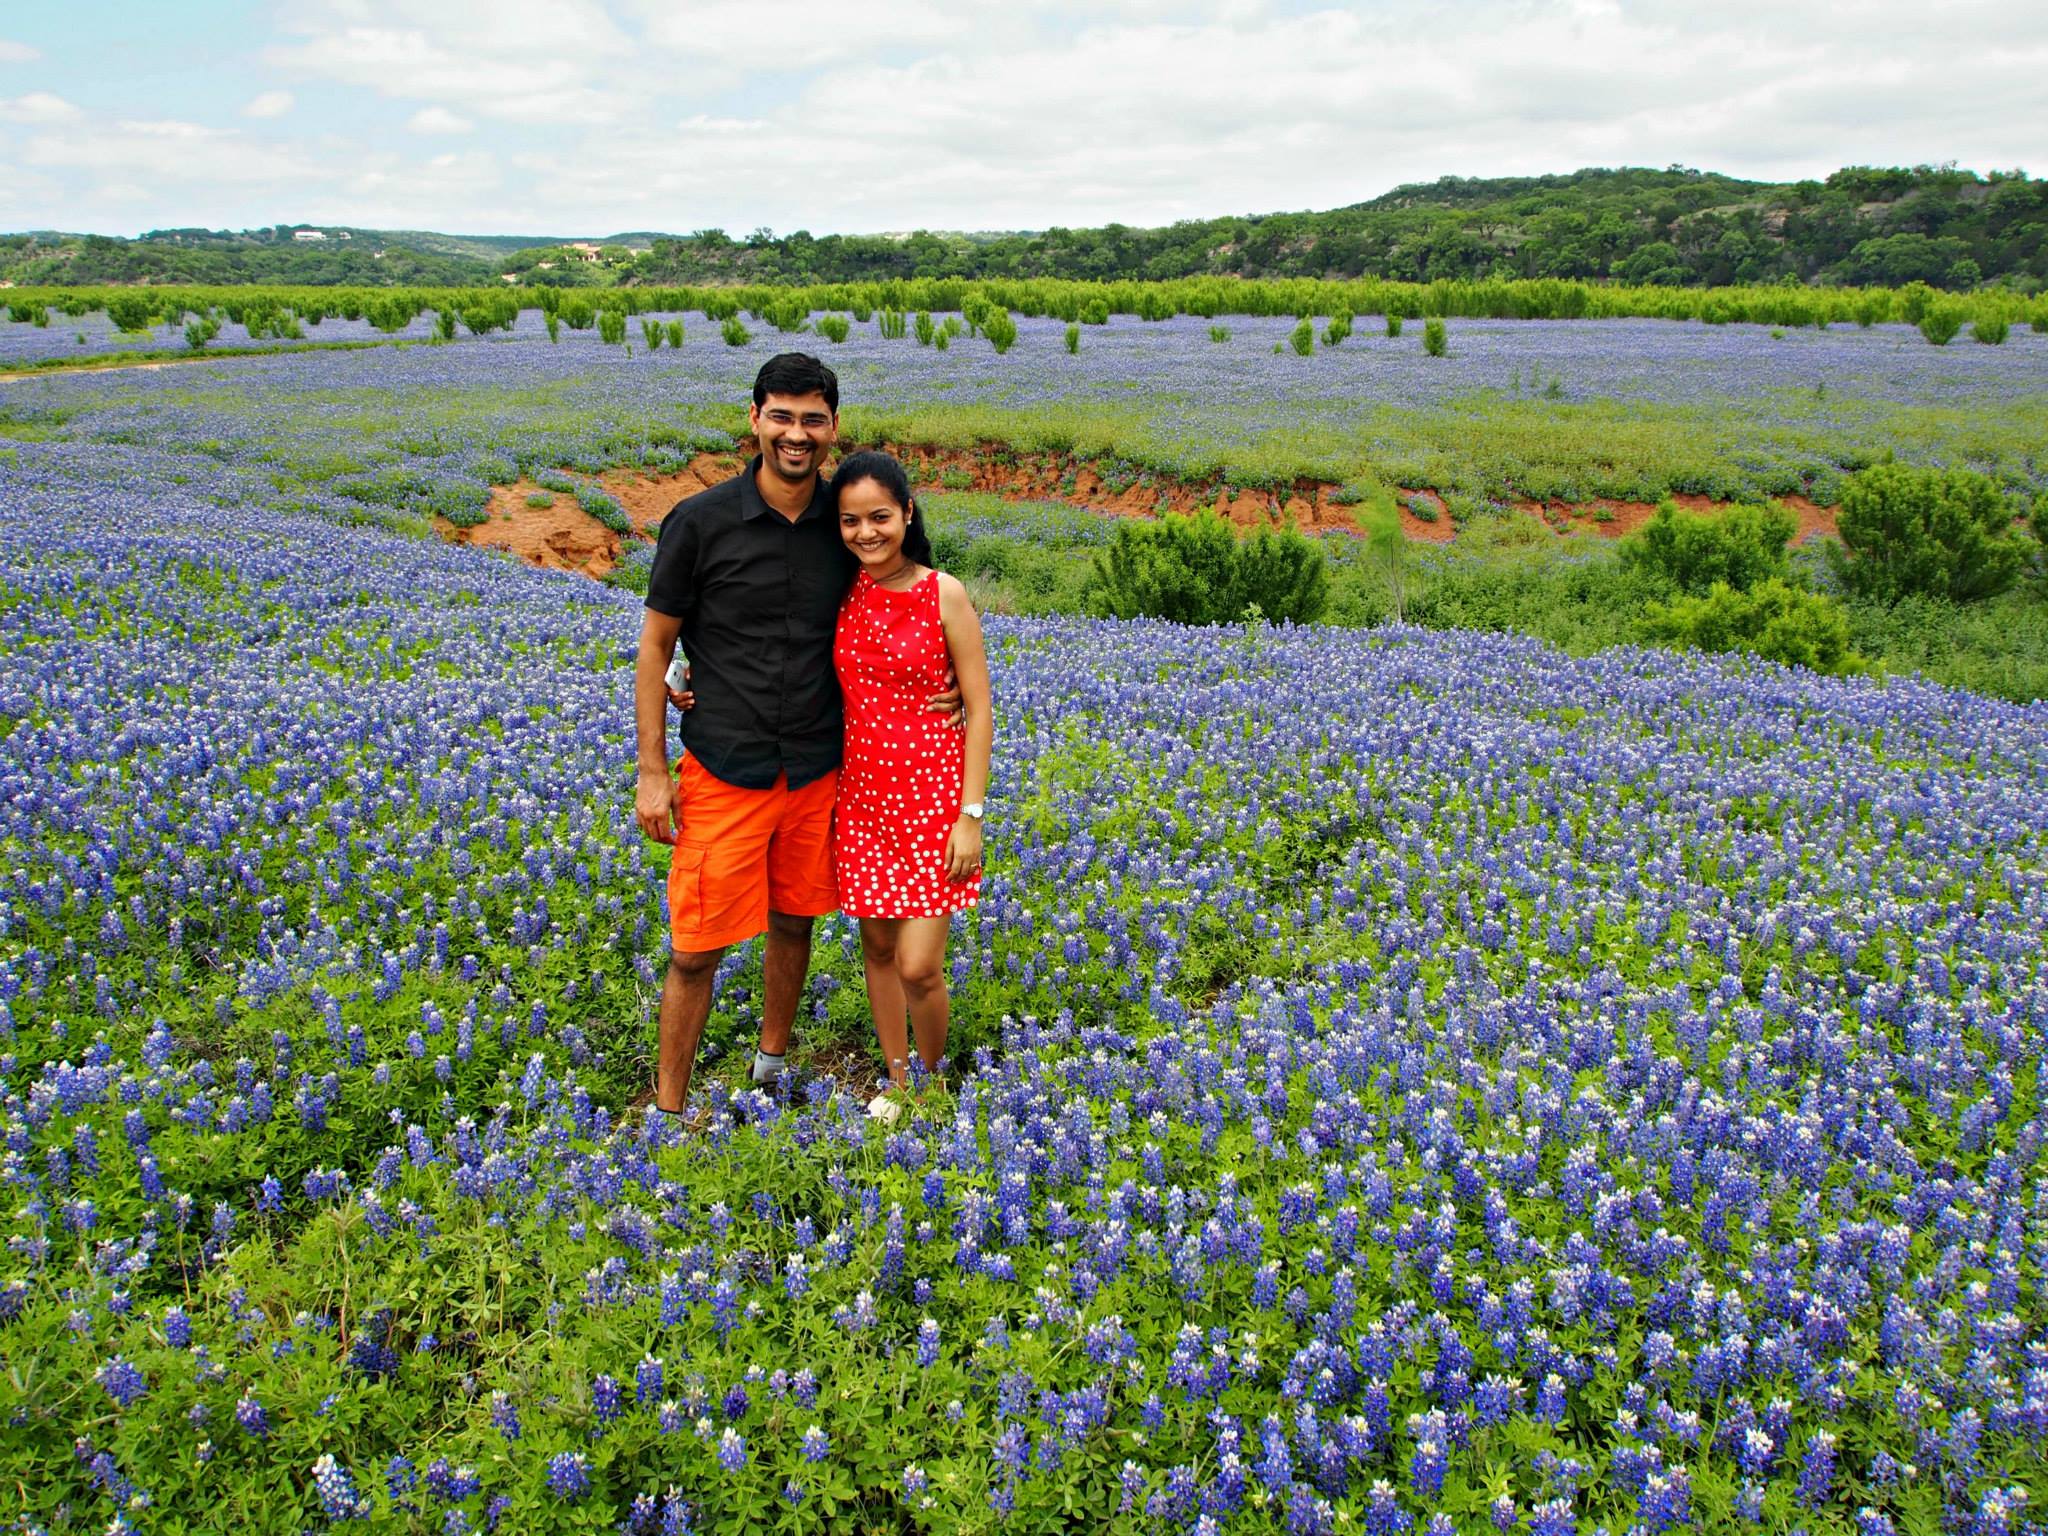 Where To See Bluebonnets In Texas